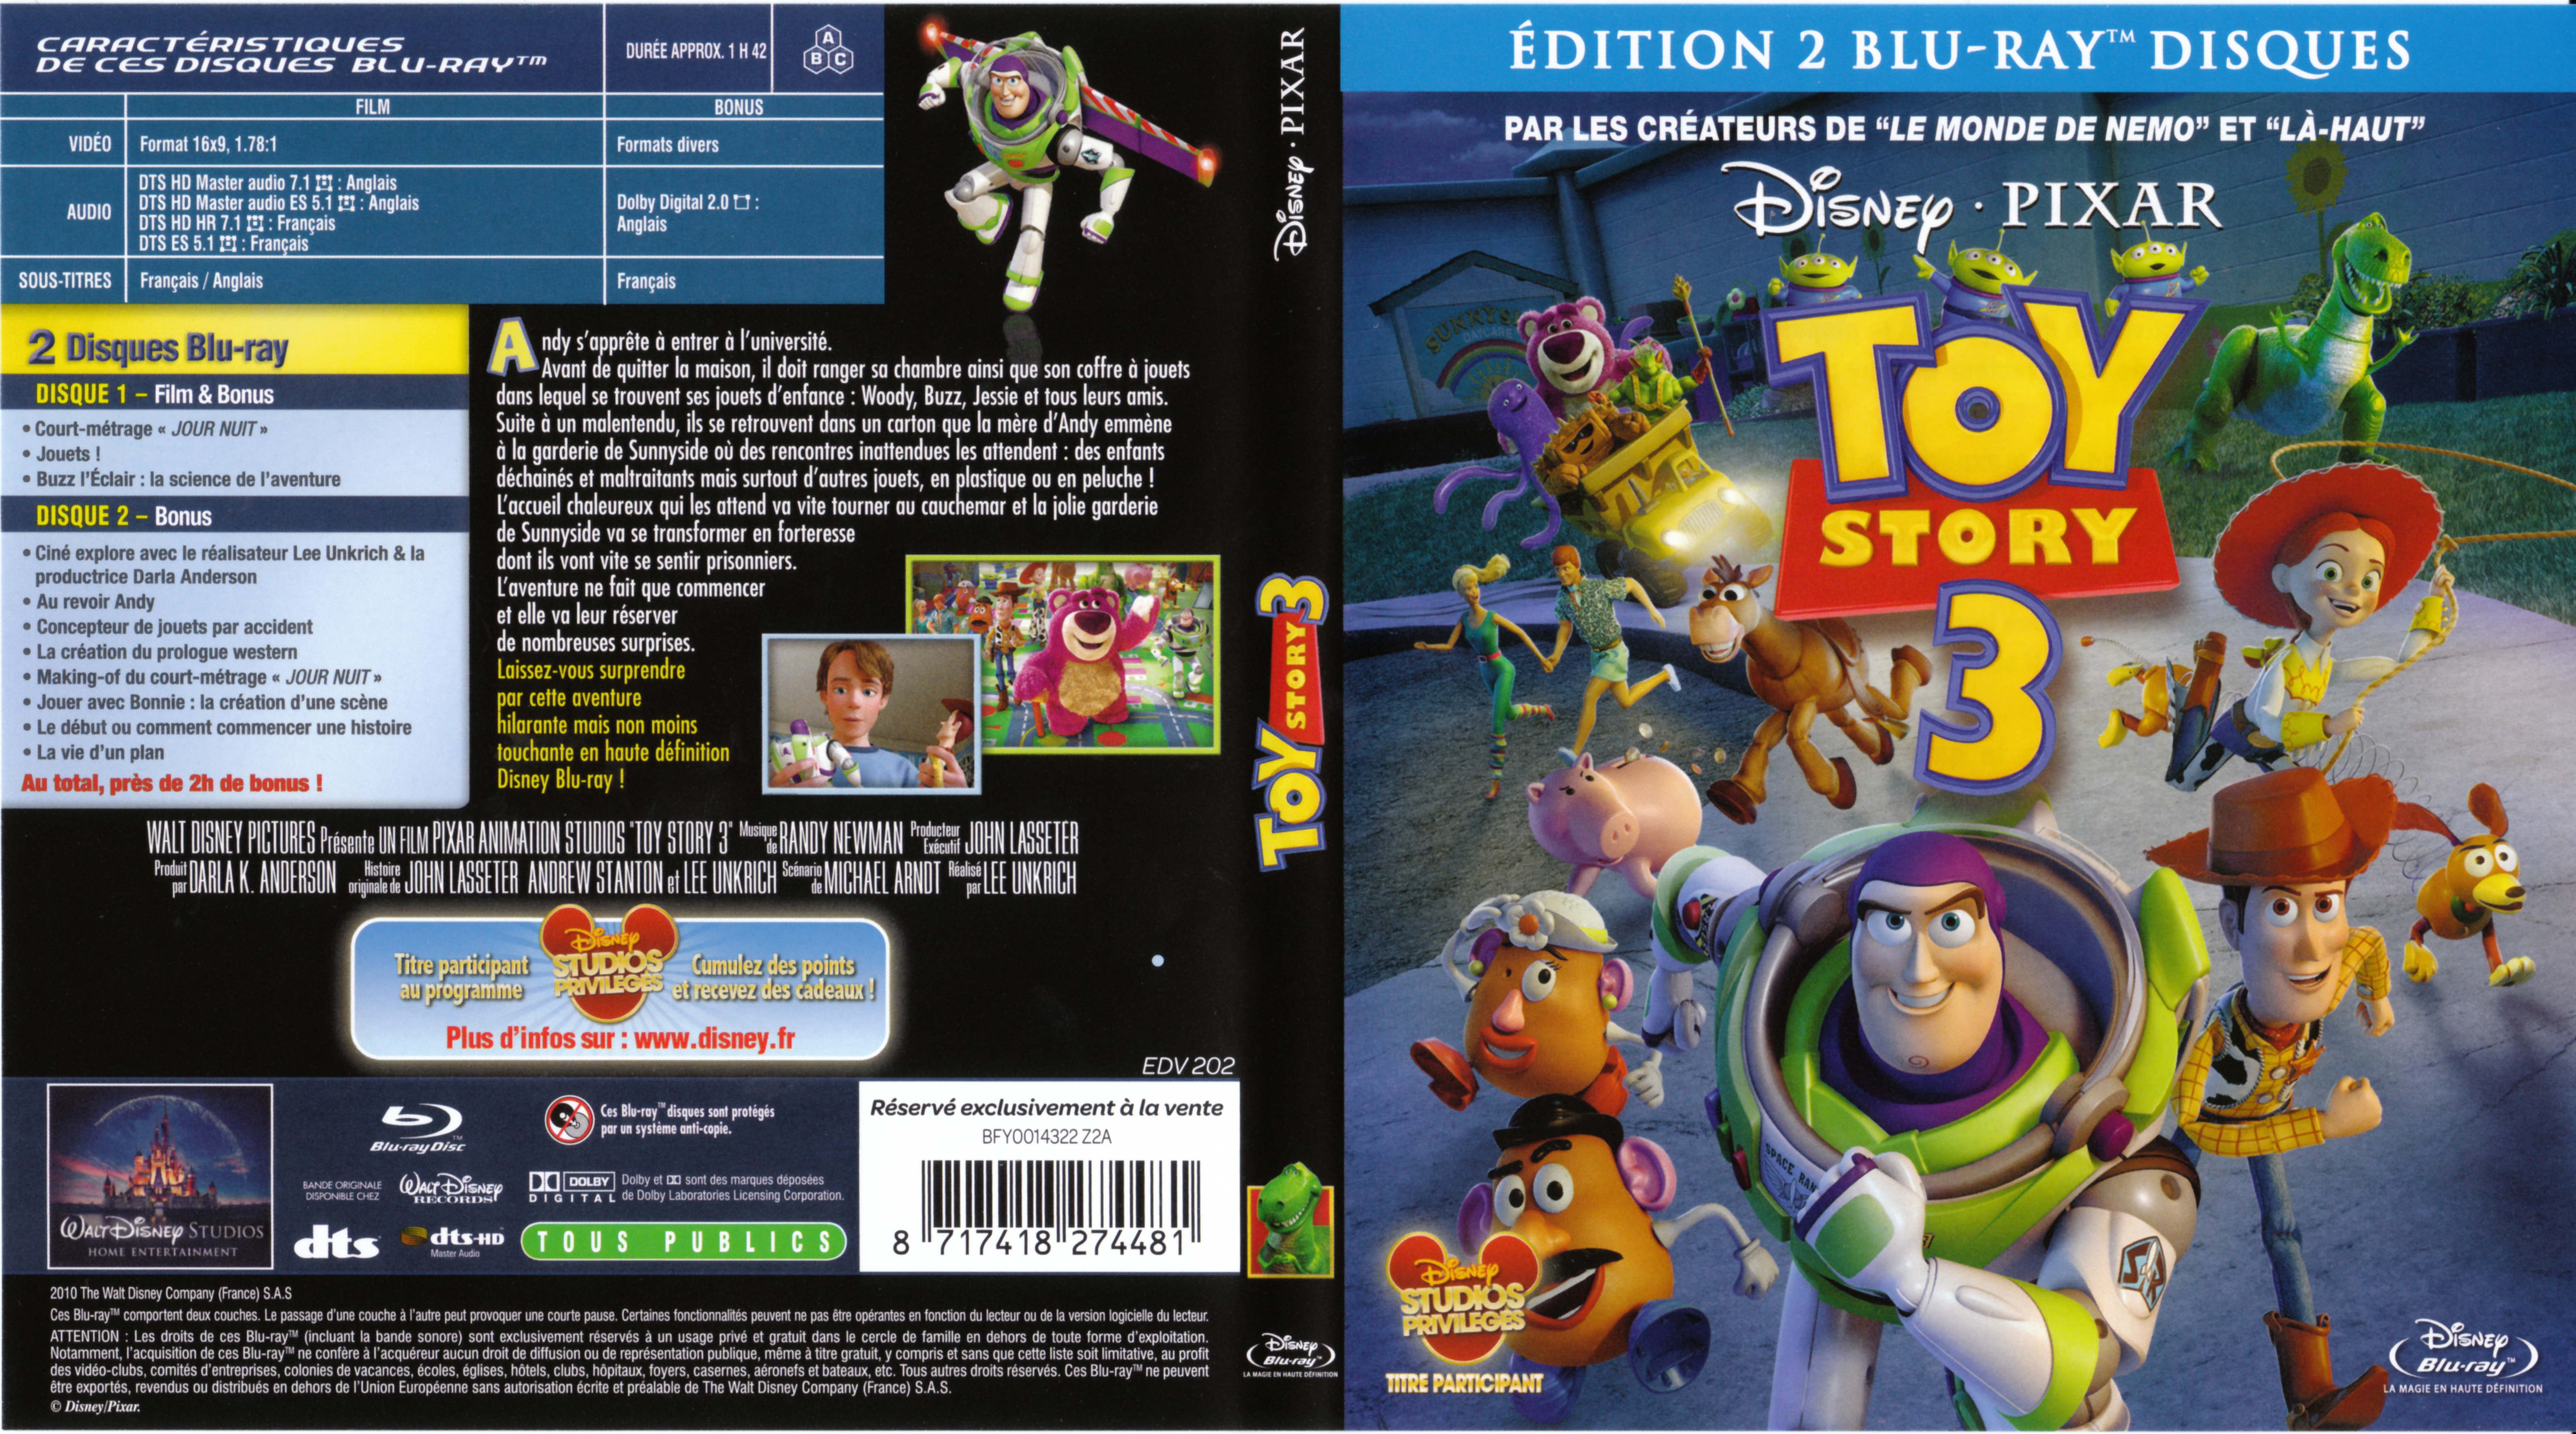 Jaquette DVD Toy story 3 (BLU-RAY)